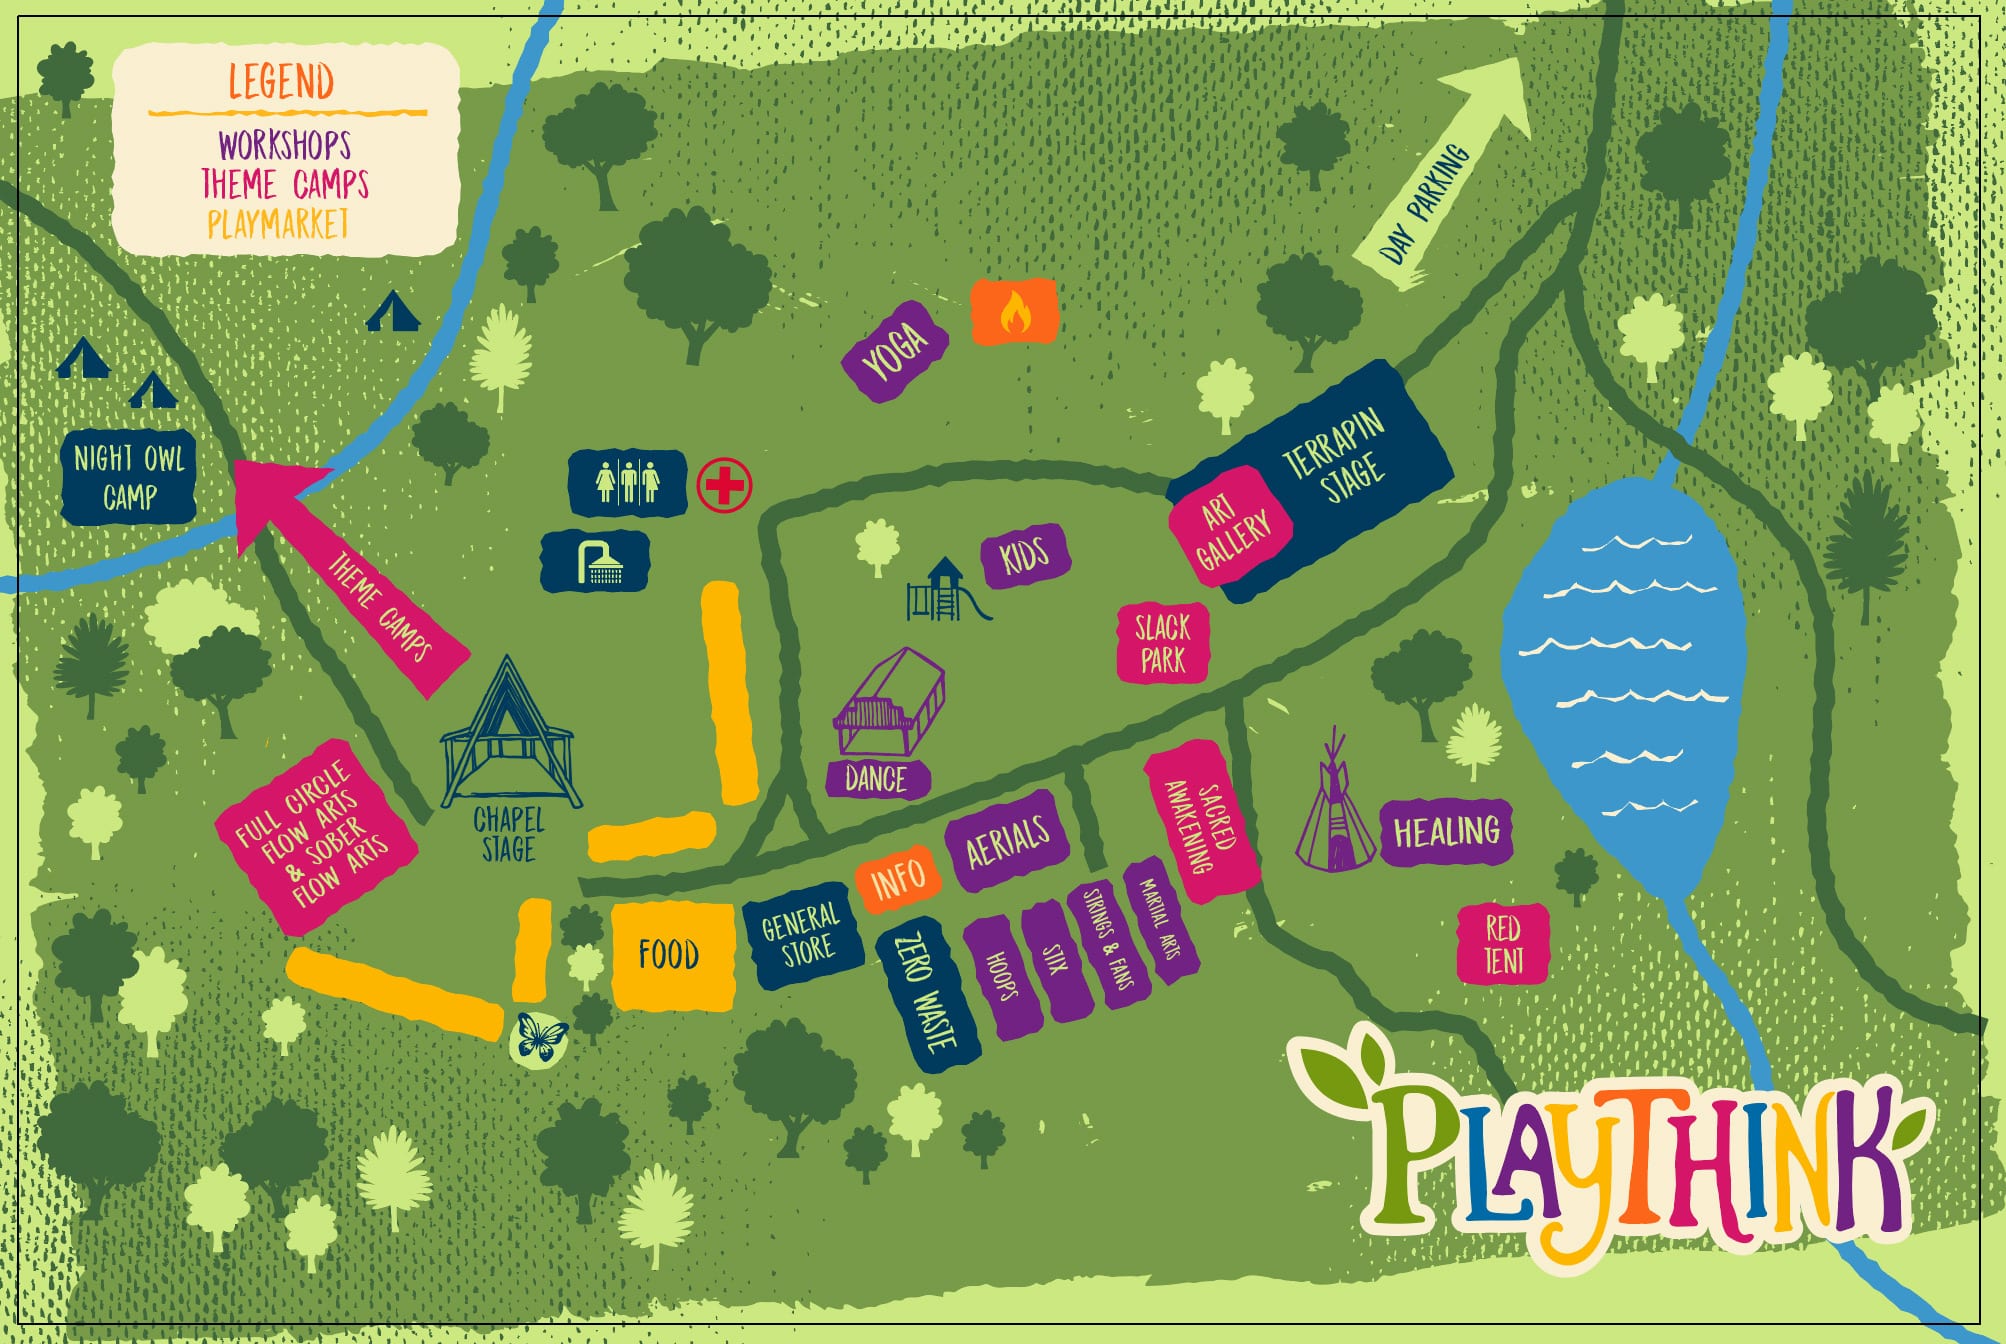 About PlayThink - PlayThink Venue Terrapin Hill Farm Map